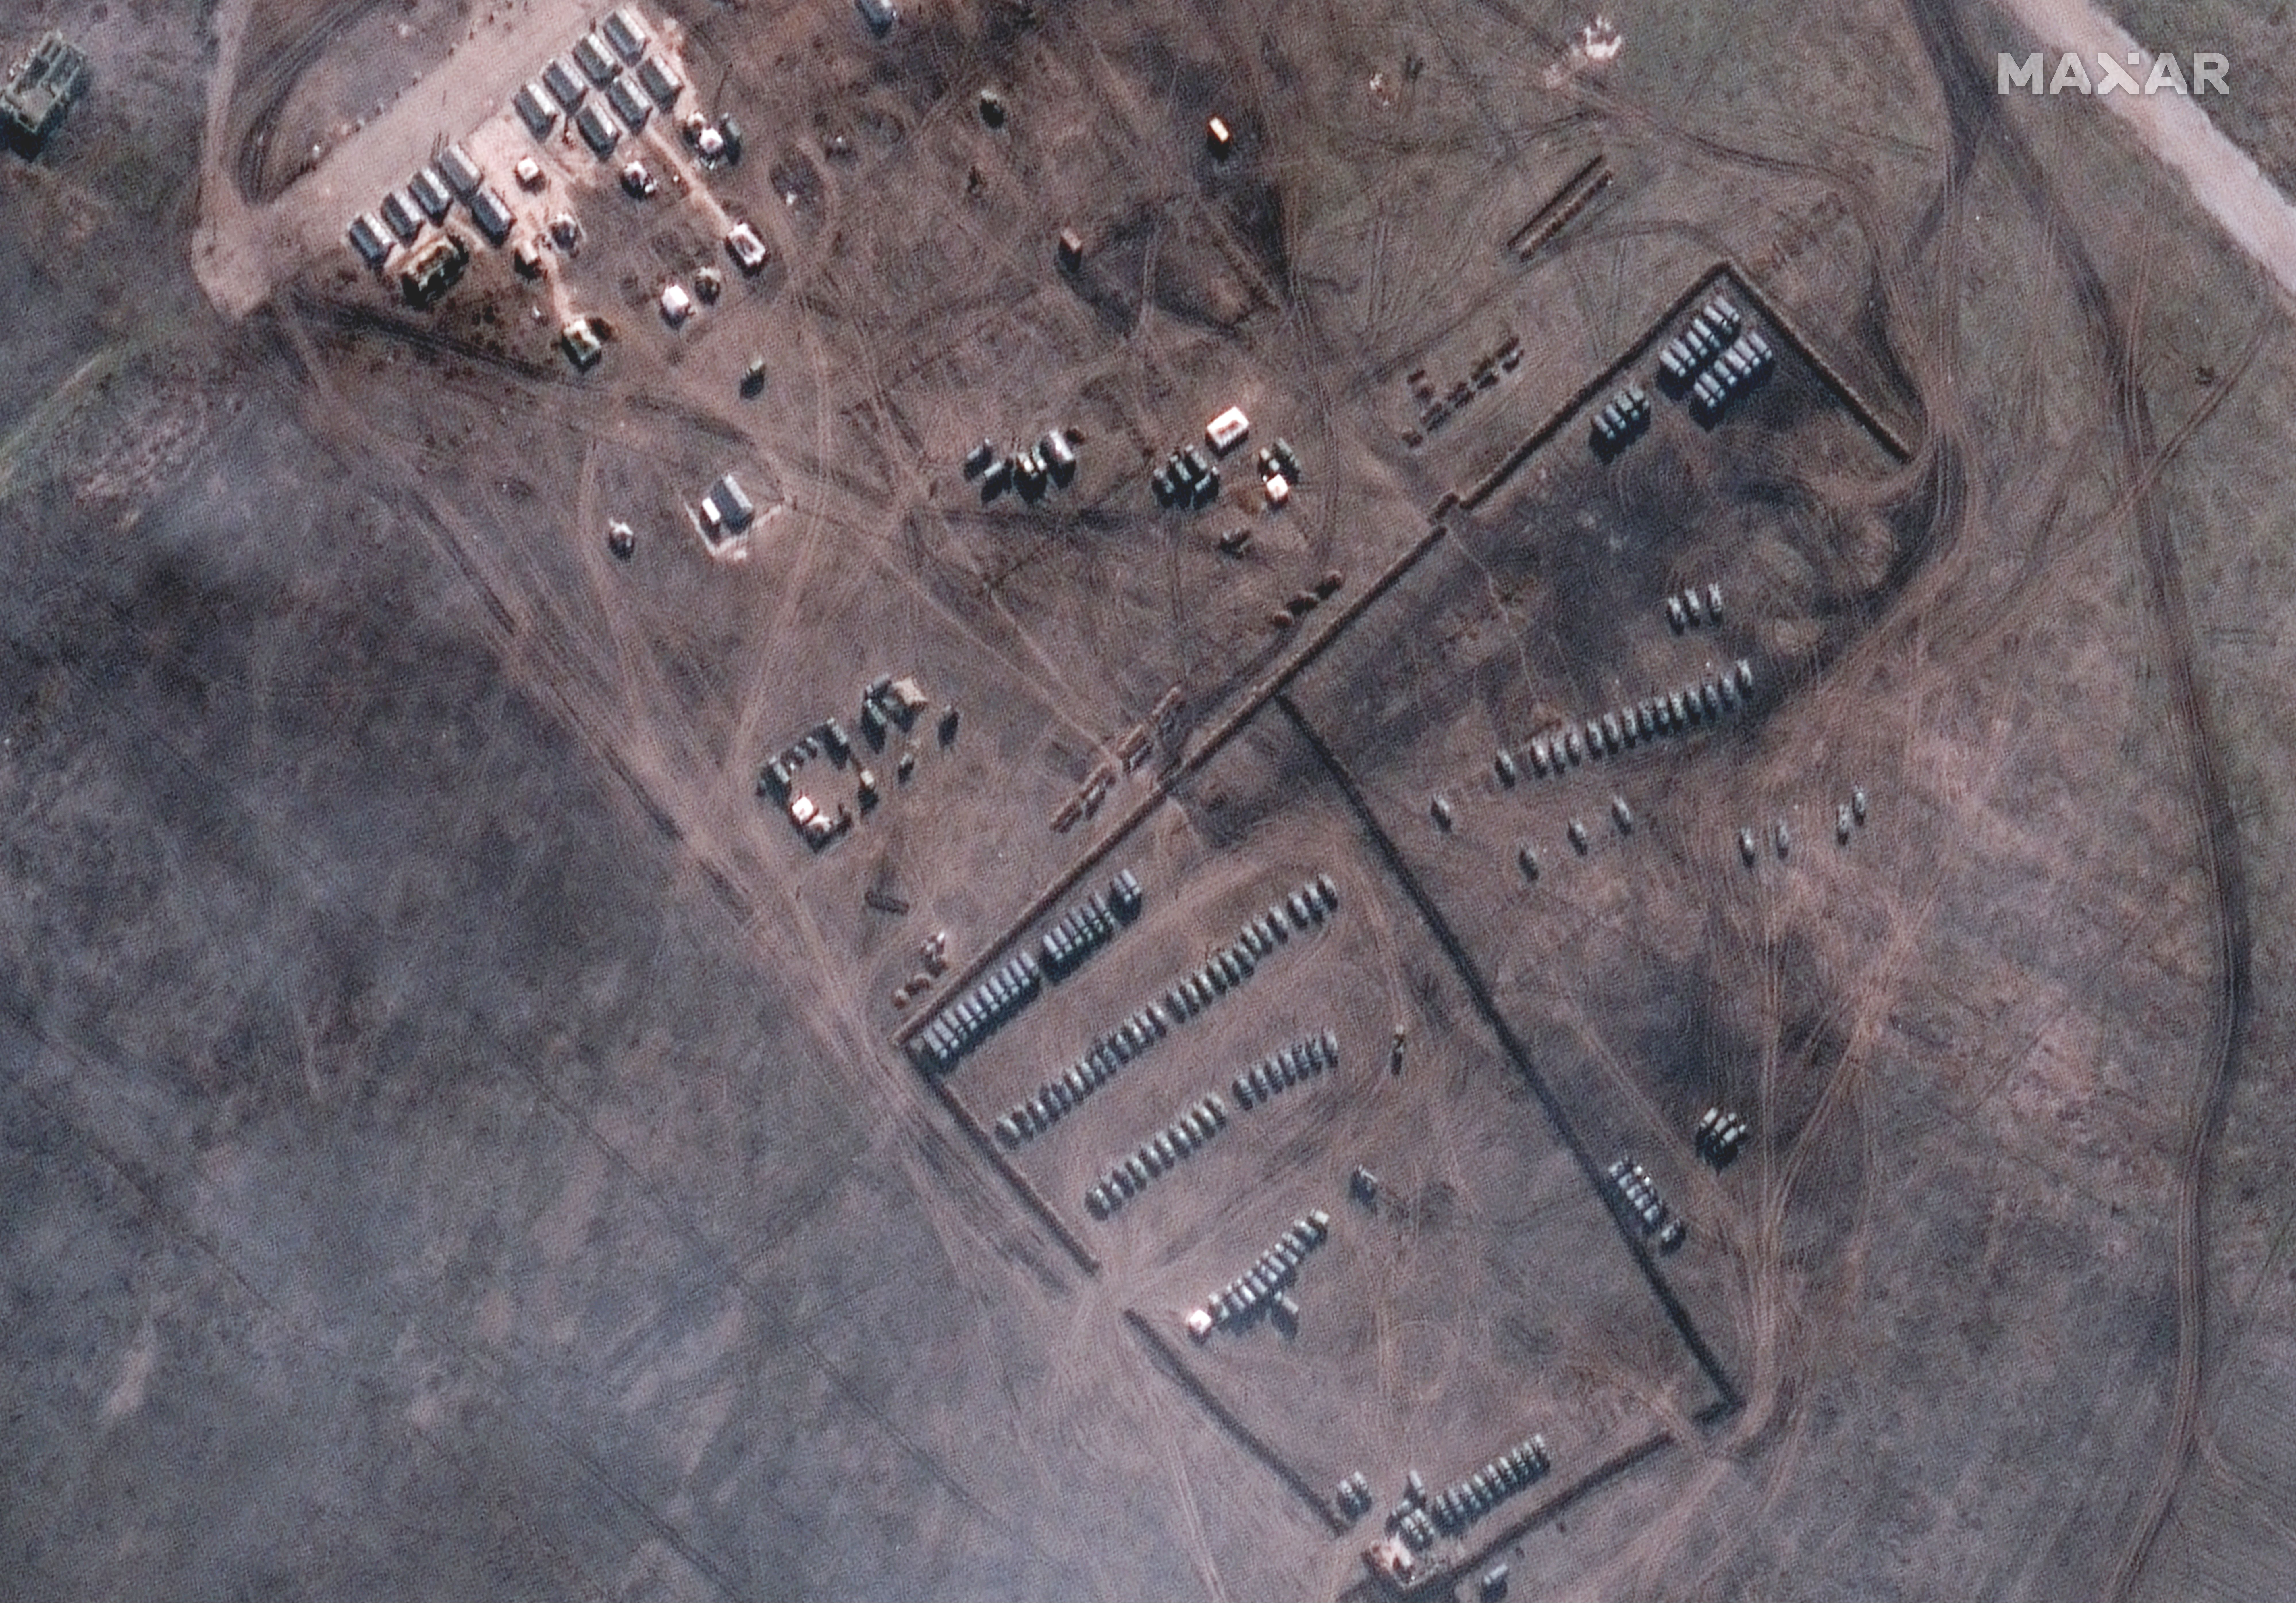 New armored vehicle deployments near Slavne, Crimea, as captured by satellite on Feb. 10.